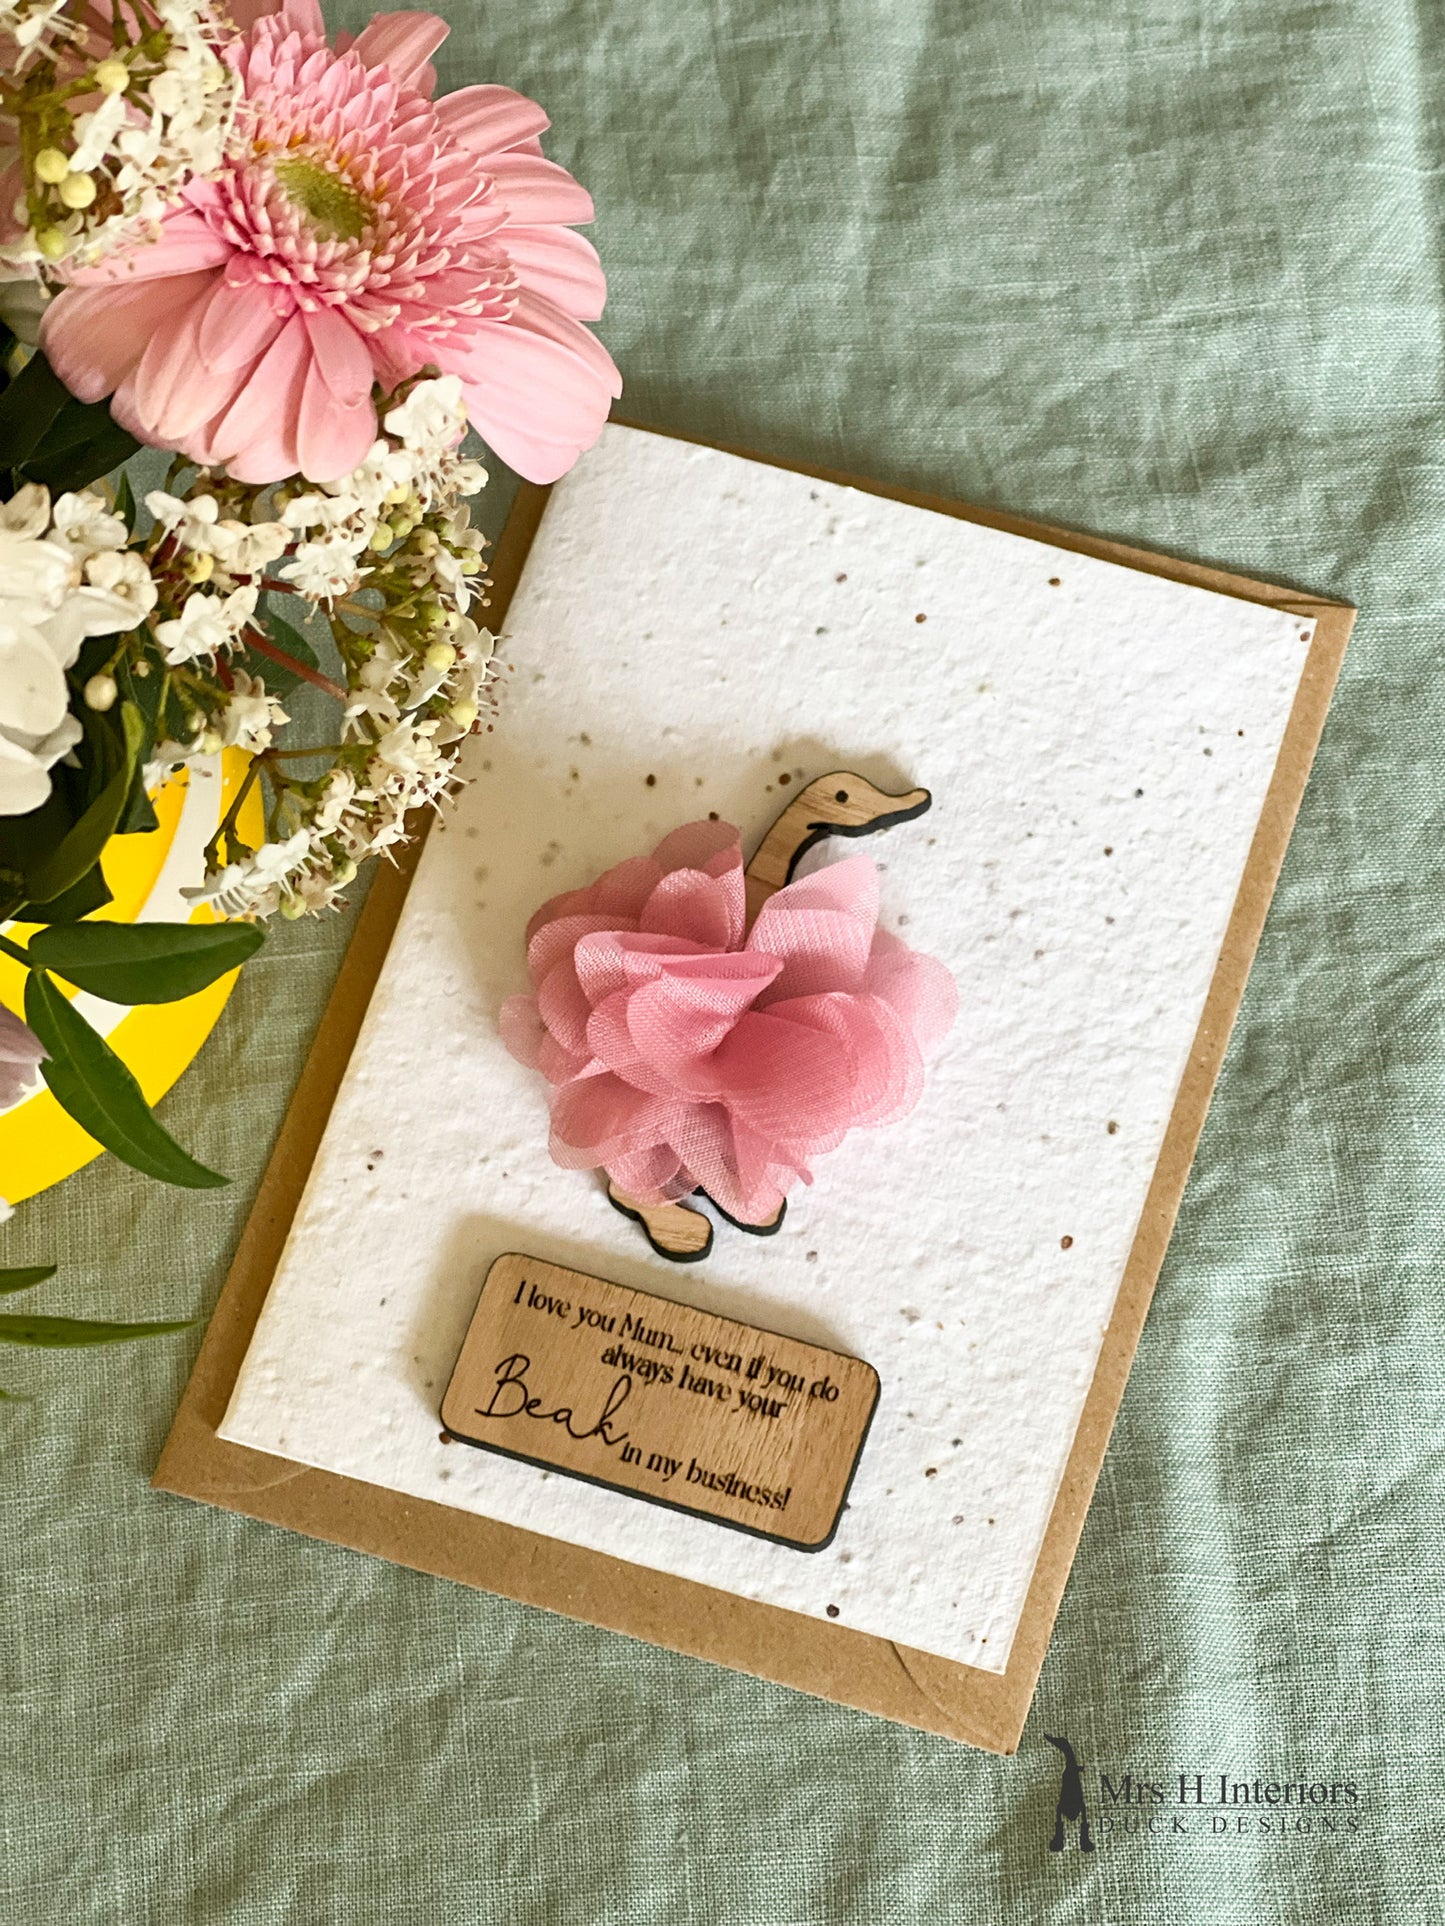 I Love You Mum... Beak in My Business - Mother's Day Card - Tutu Wearing Duck - Decorated Wooden Duck in Boots by Mrs H the Duck Lady